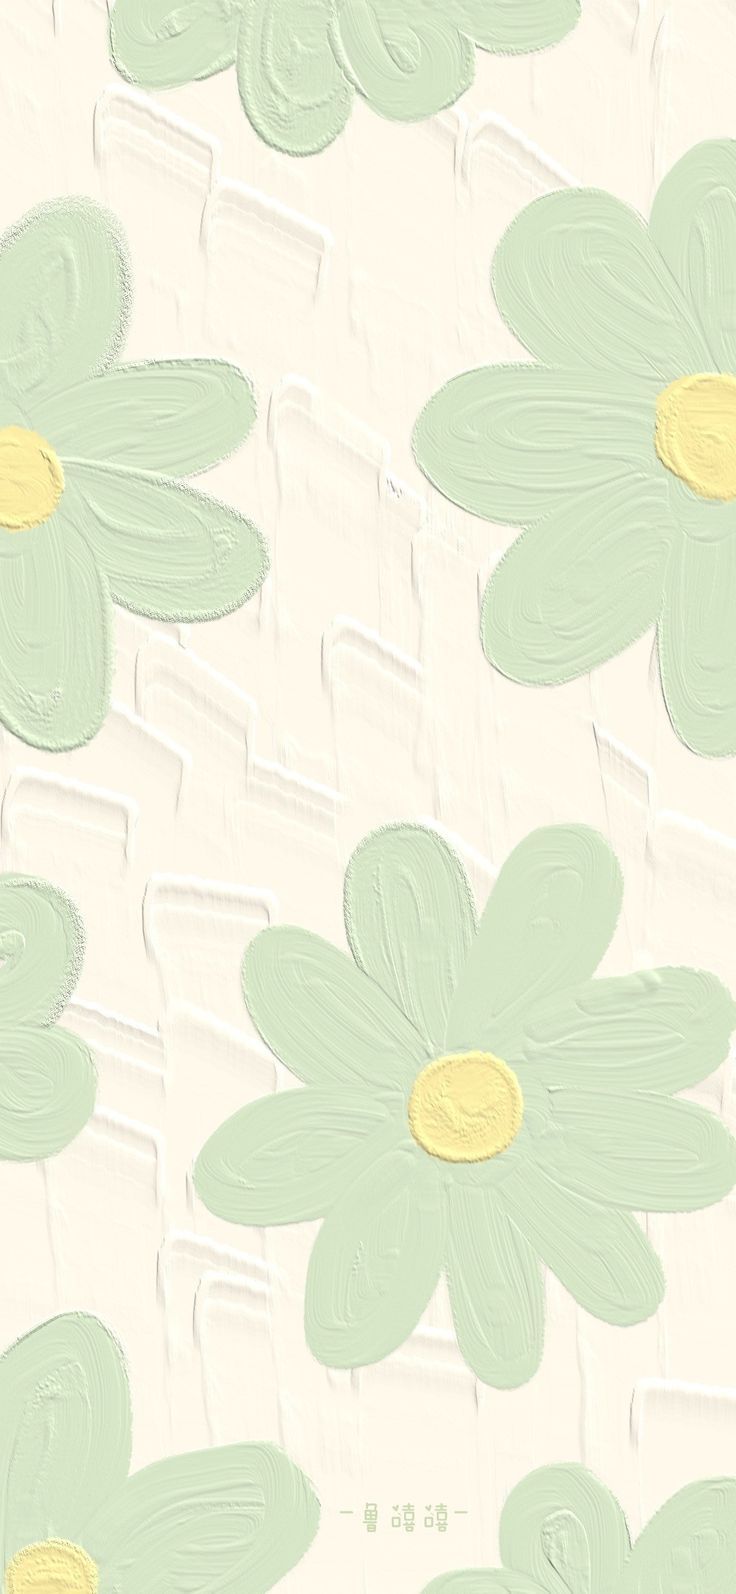 Pin by MWEII on   Mint green wallpaper iphone Mint green wallpaper Iphone wallpaper green